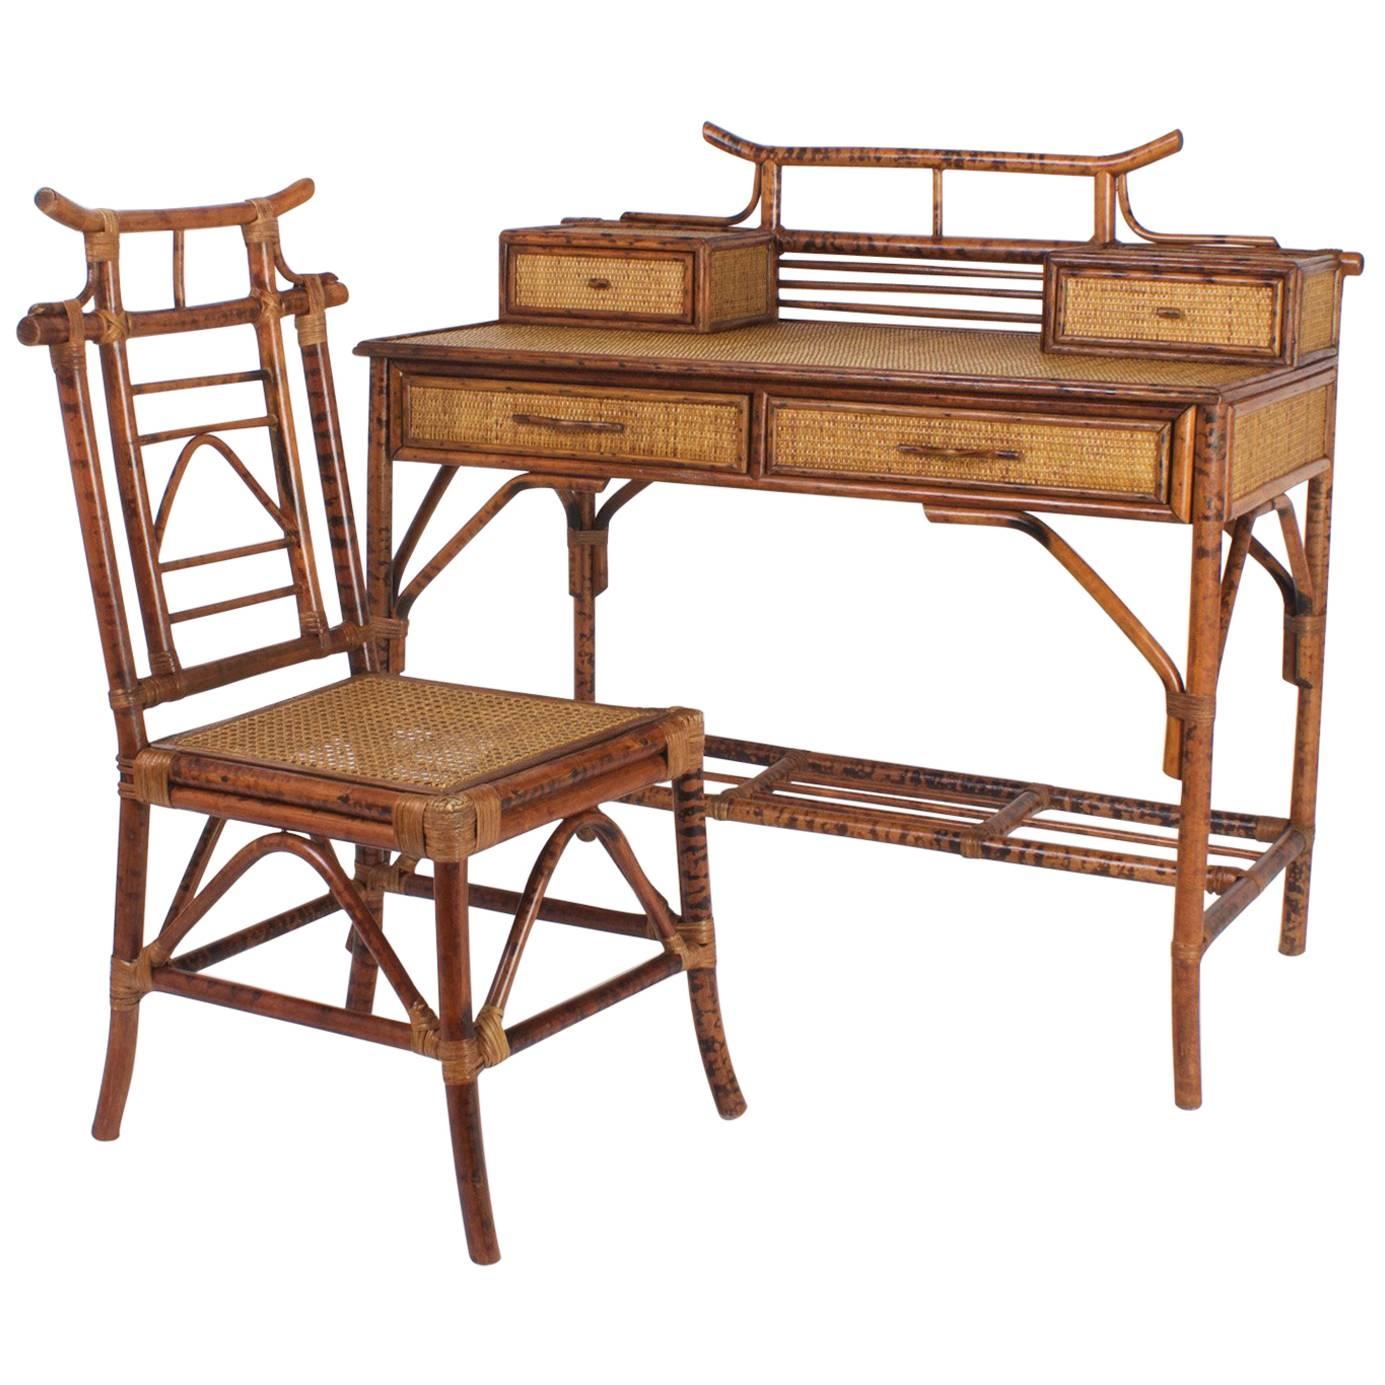 Chinoiserie Faux Bamboo Grass Cloth Desk and Chair